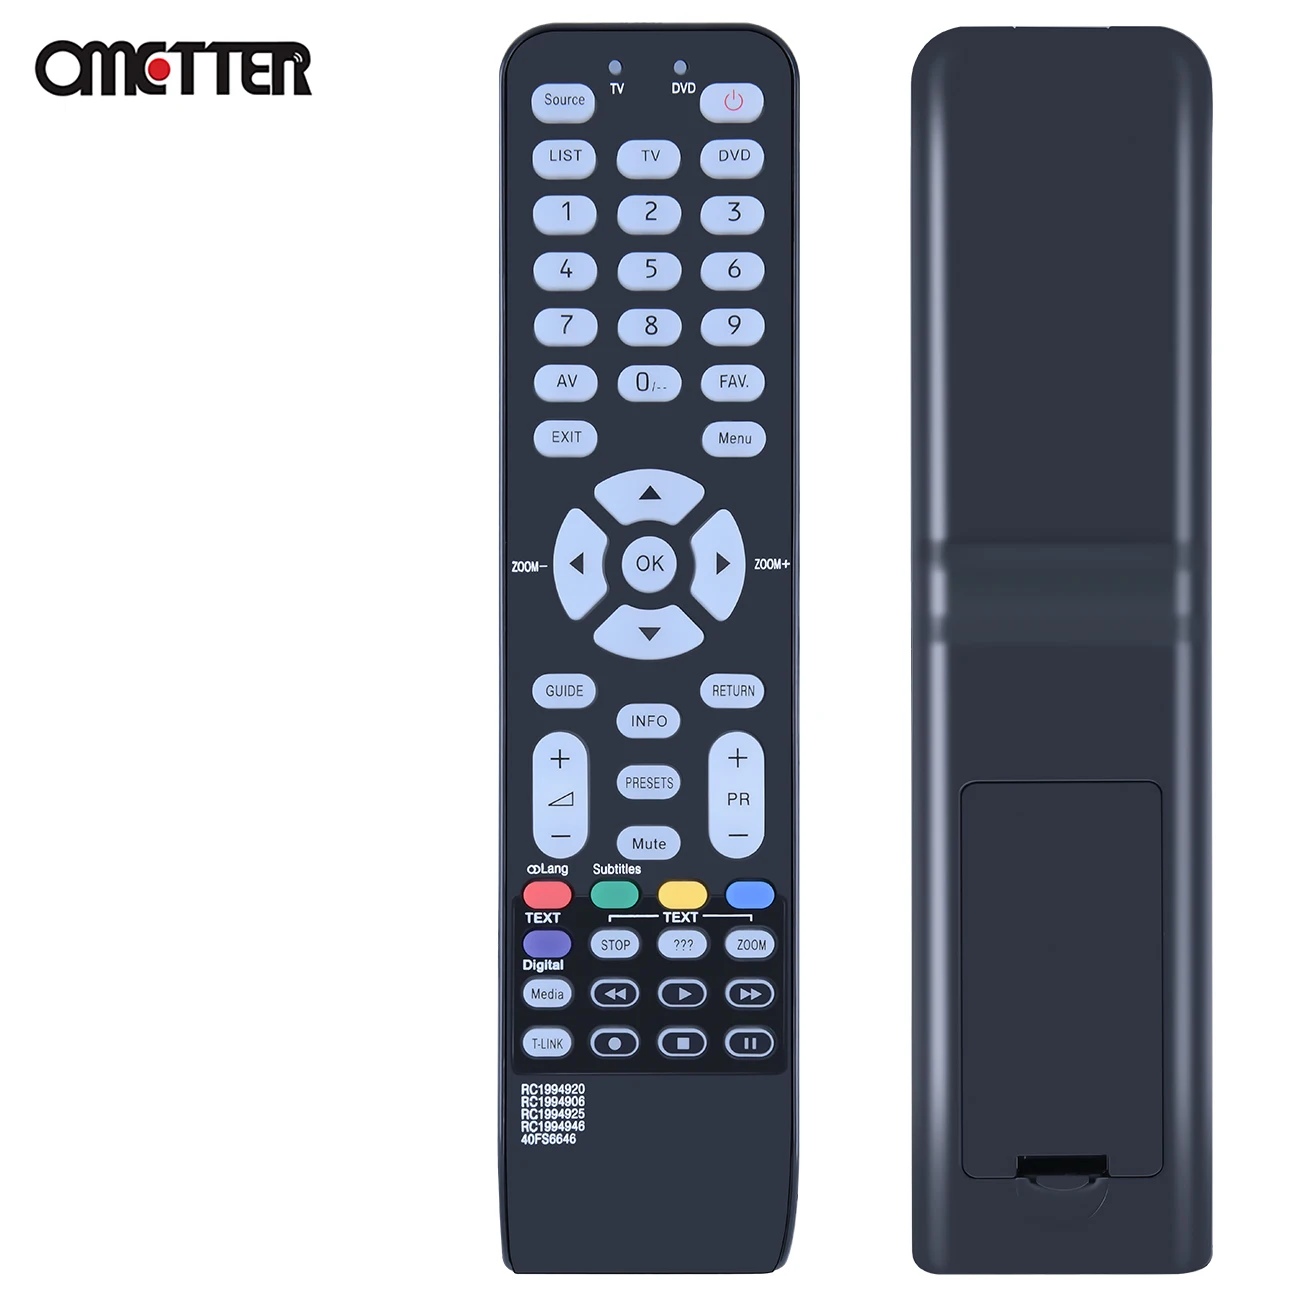 RC1994920 RC1994906 for THOMSON TCL TV Remote Control RC1994925.RC1994946.40FS3246.55FS6646 22B33H 26C35H 19HR3022 40FS6646 images - 6